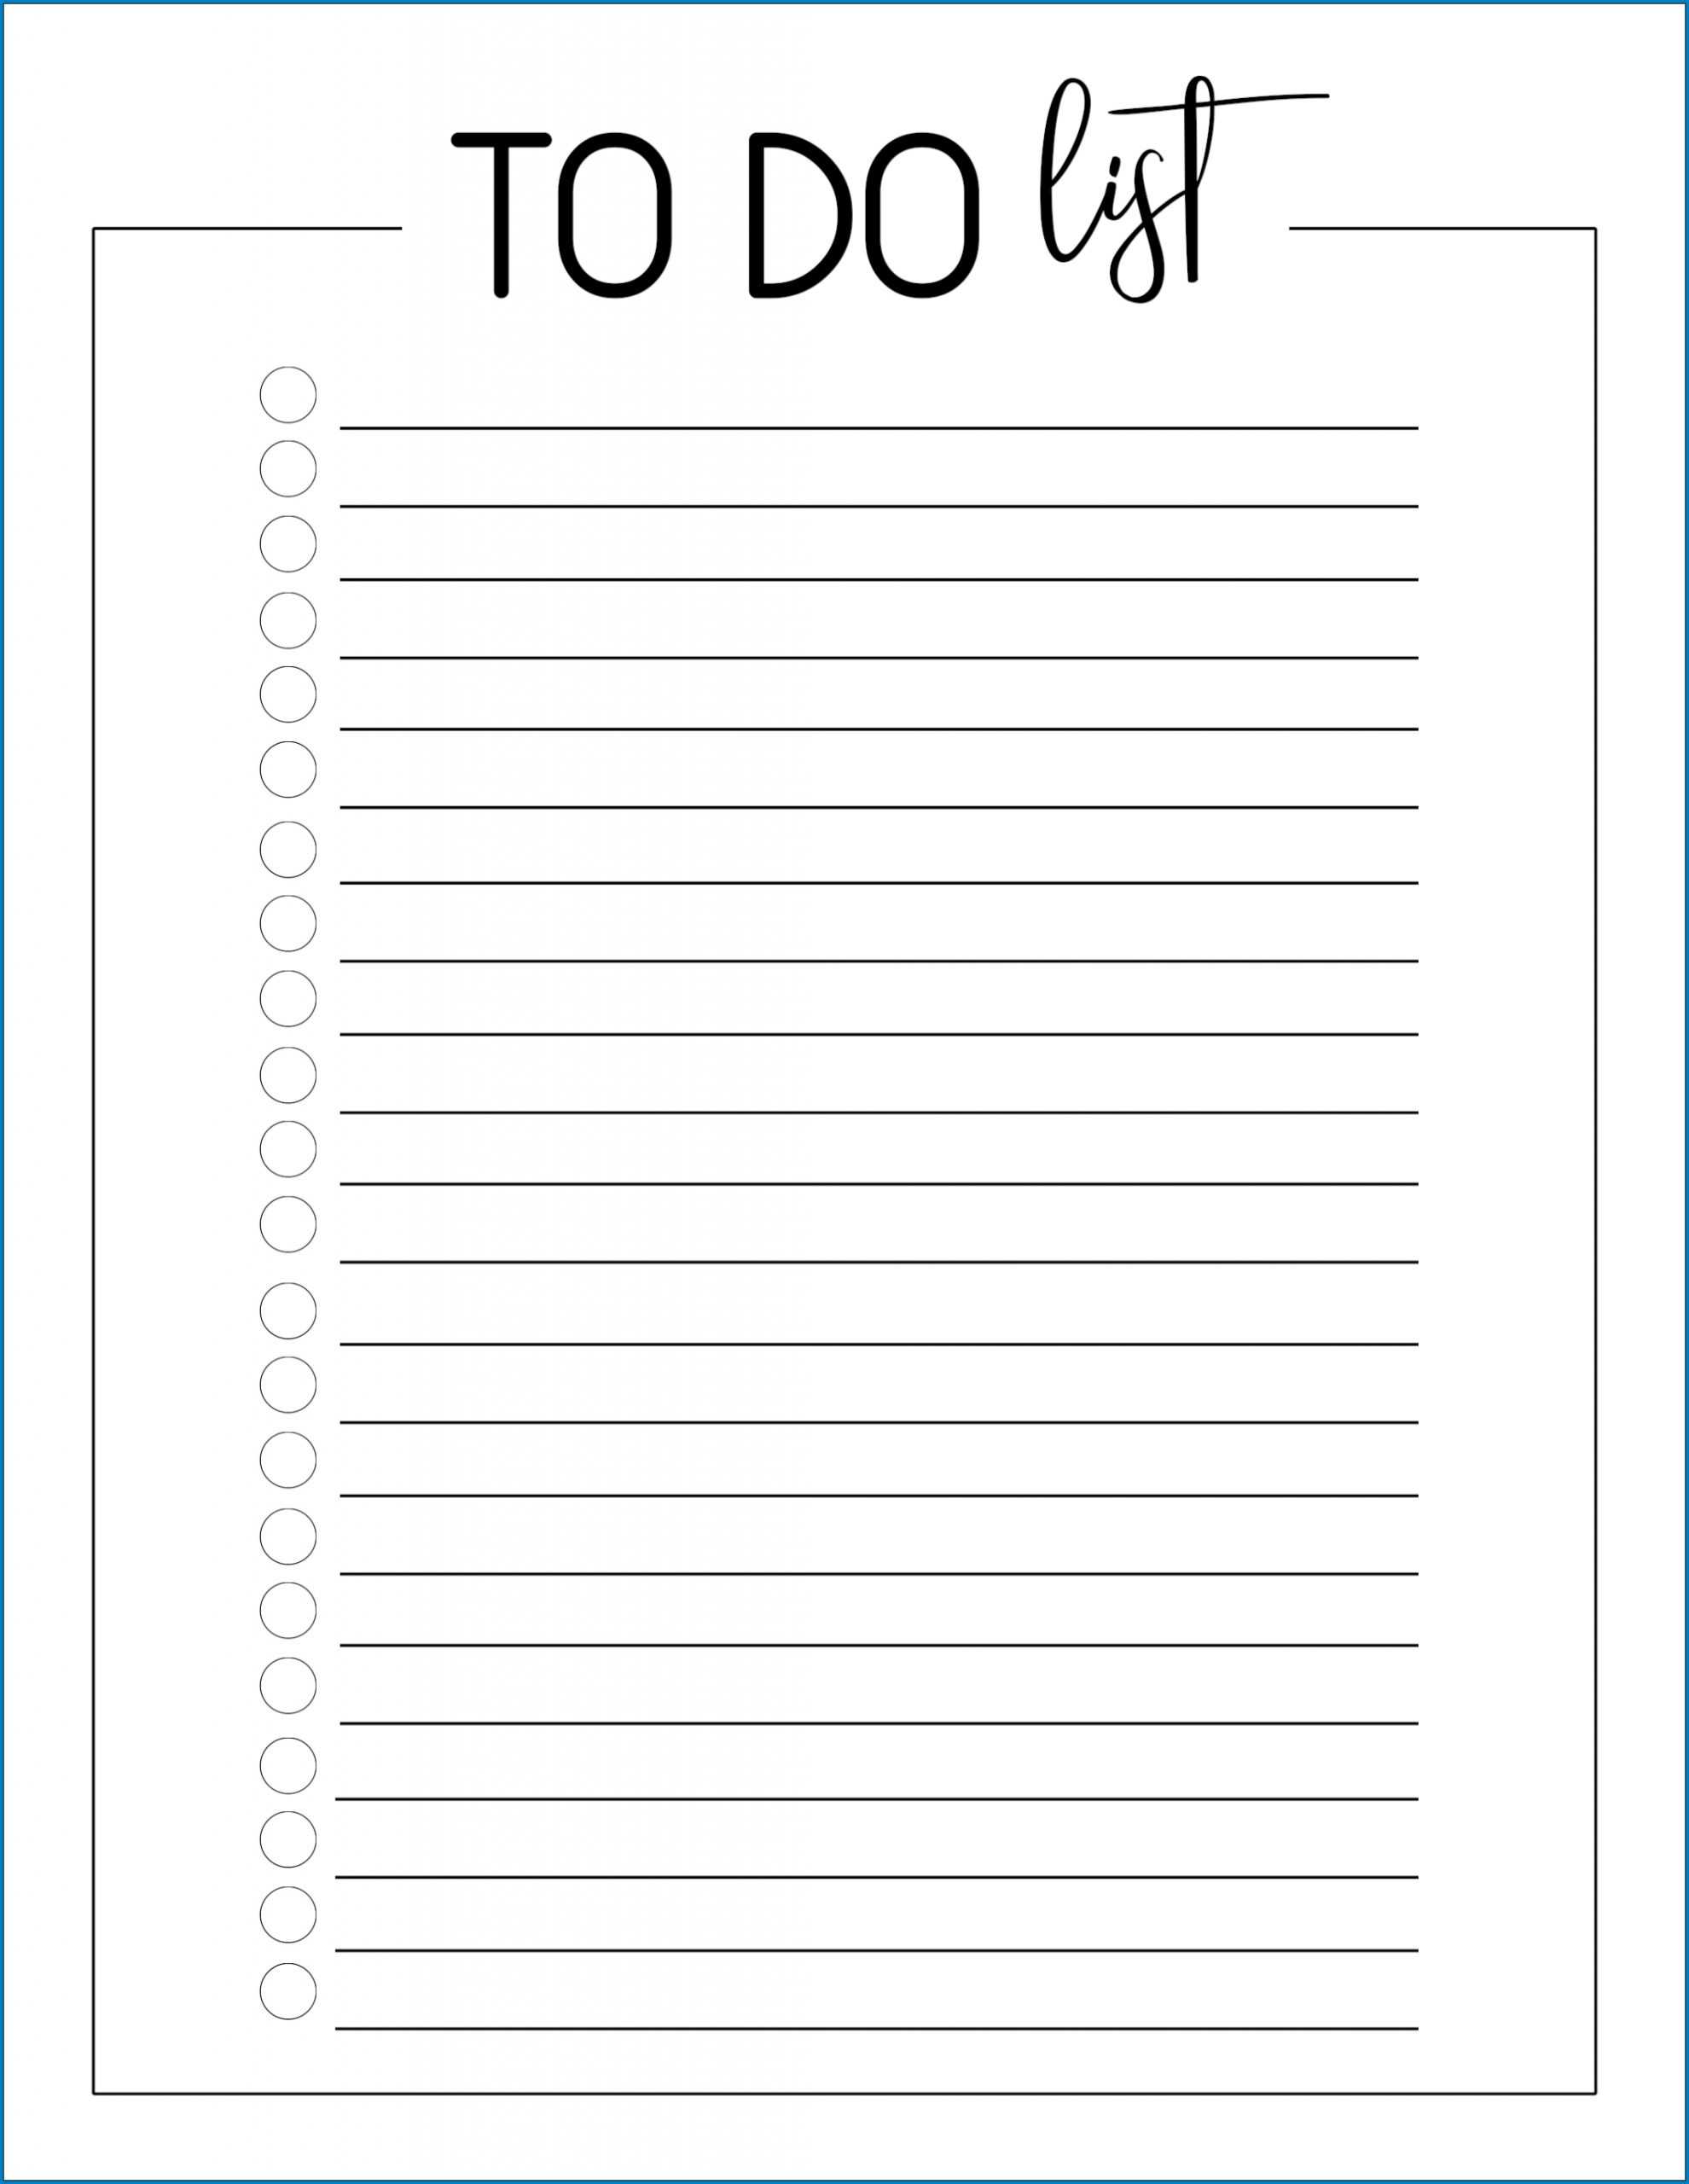 √ Free To Do List Printable Template | Templateral Throughout Blank To Do List Template